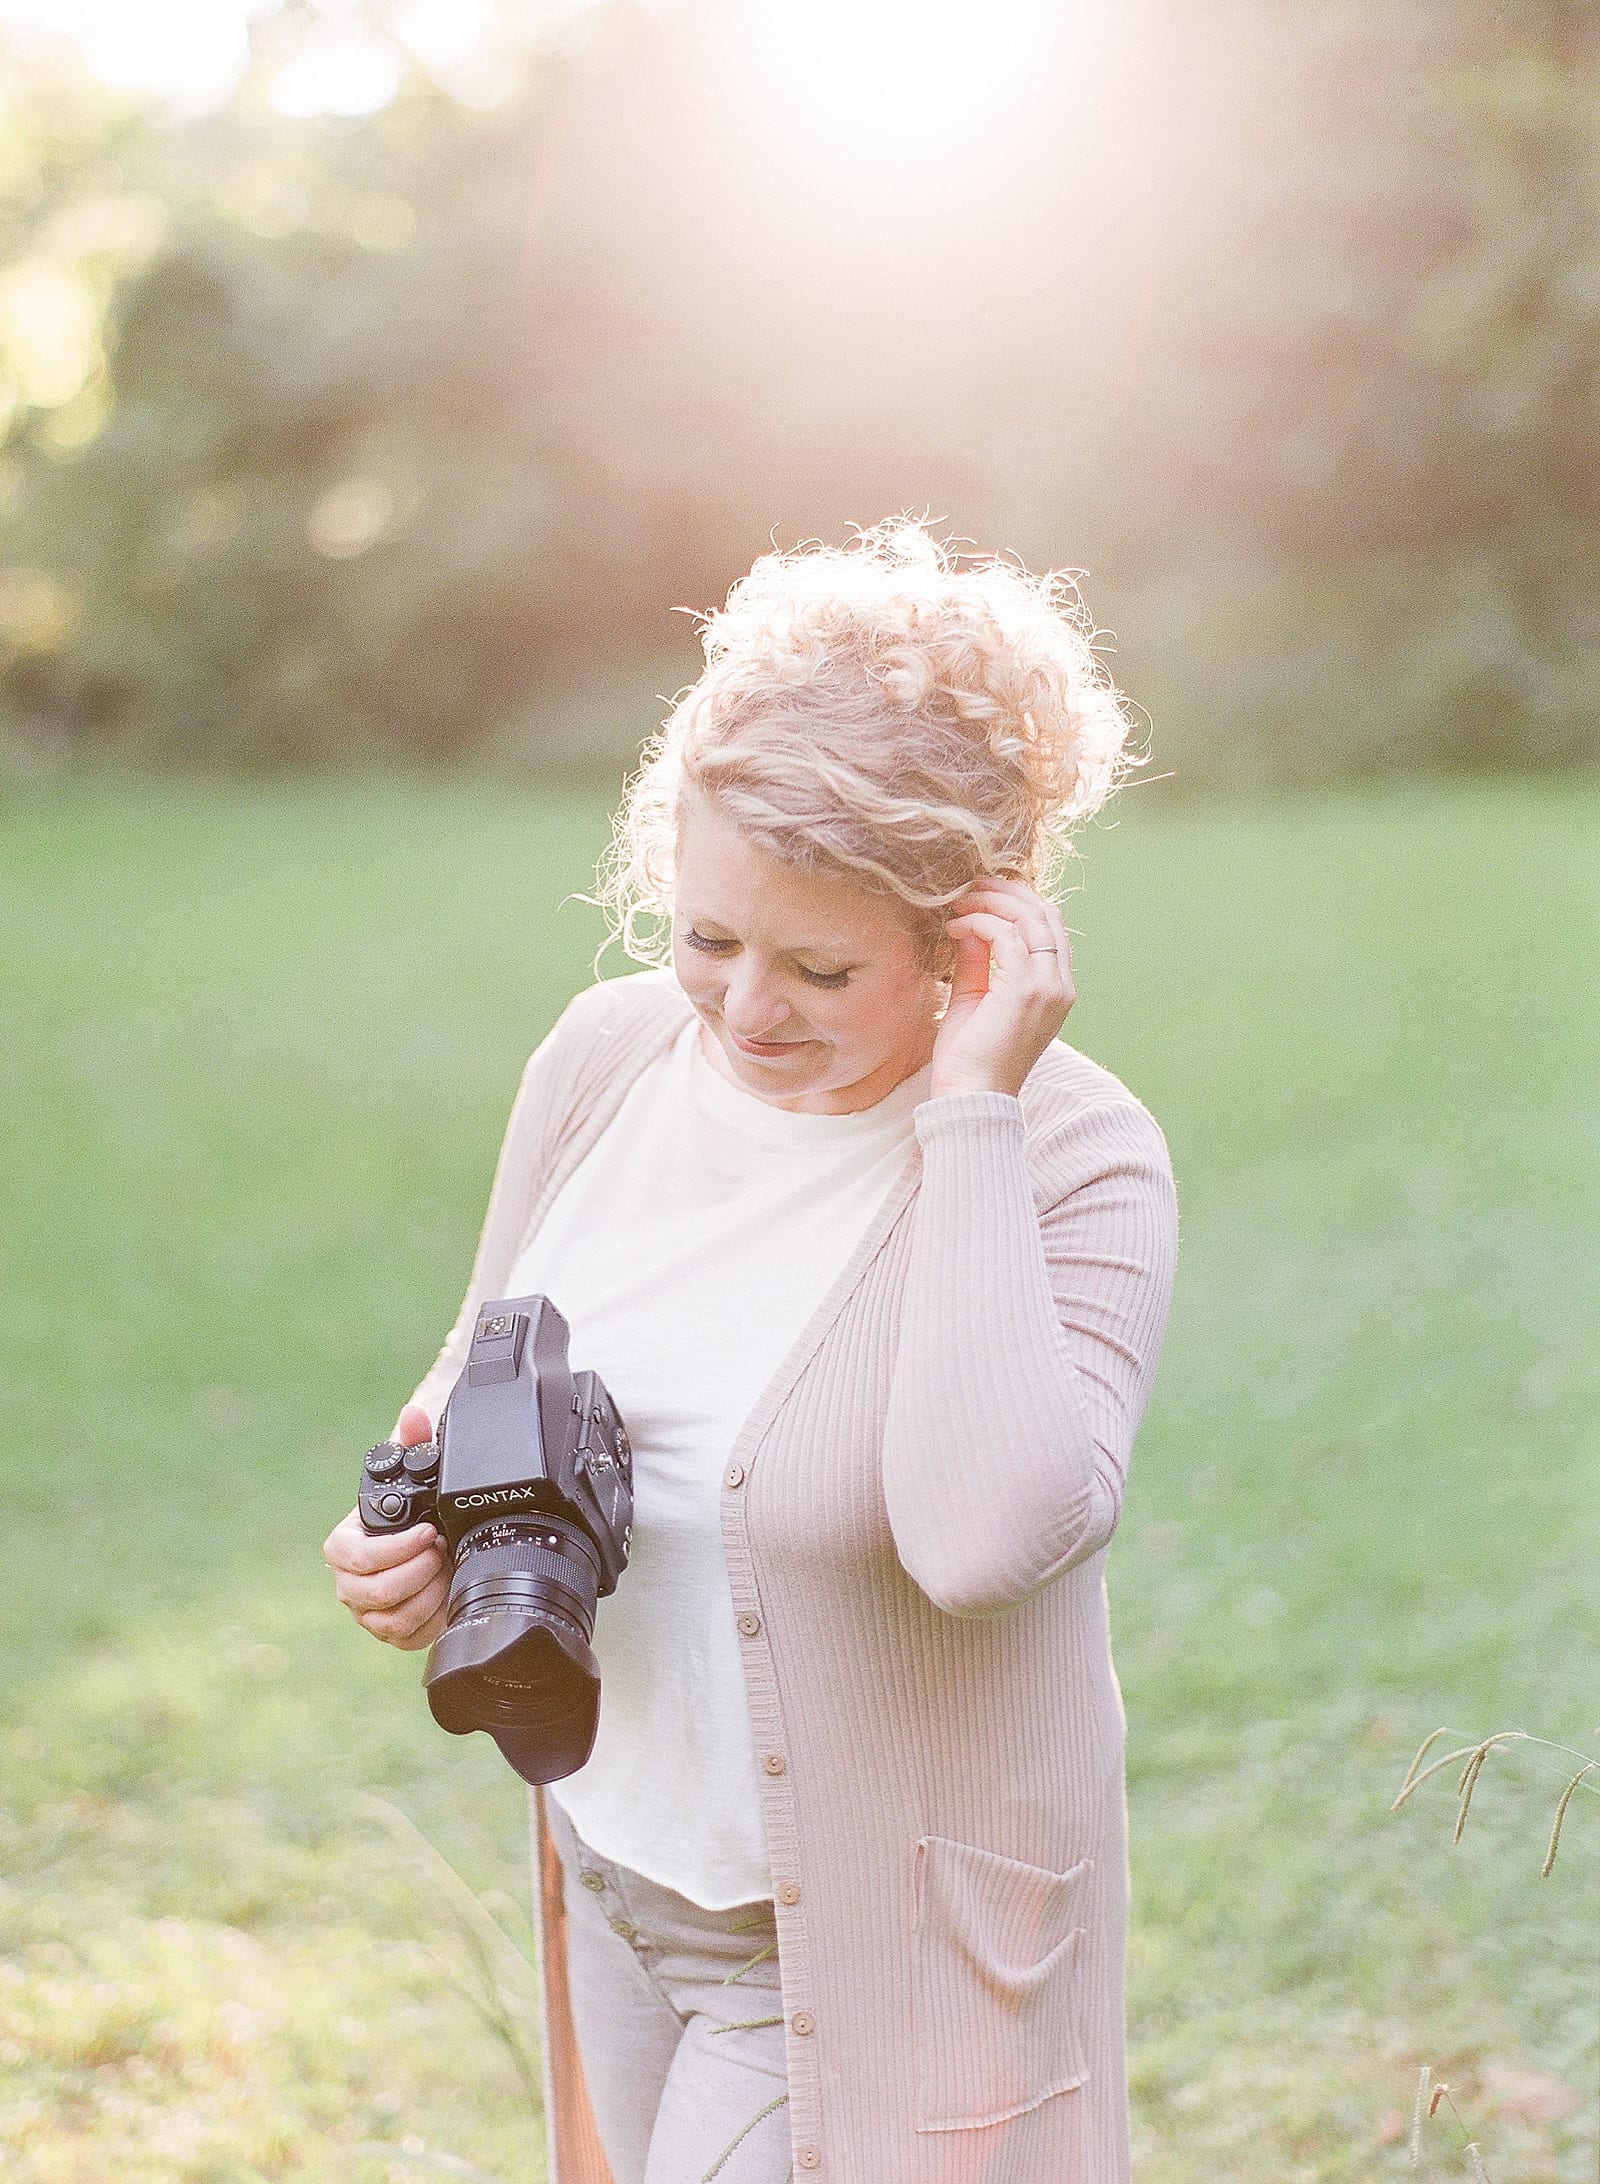 Branding Photography Woman Holding Camera Looking Down Photo